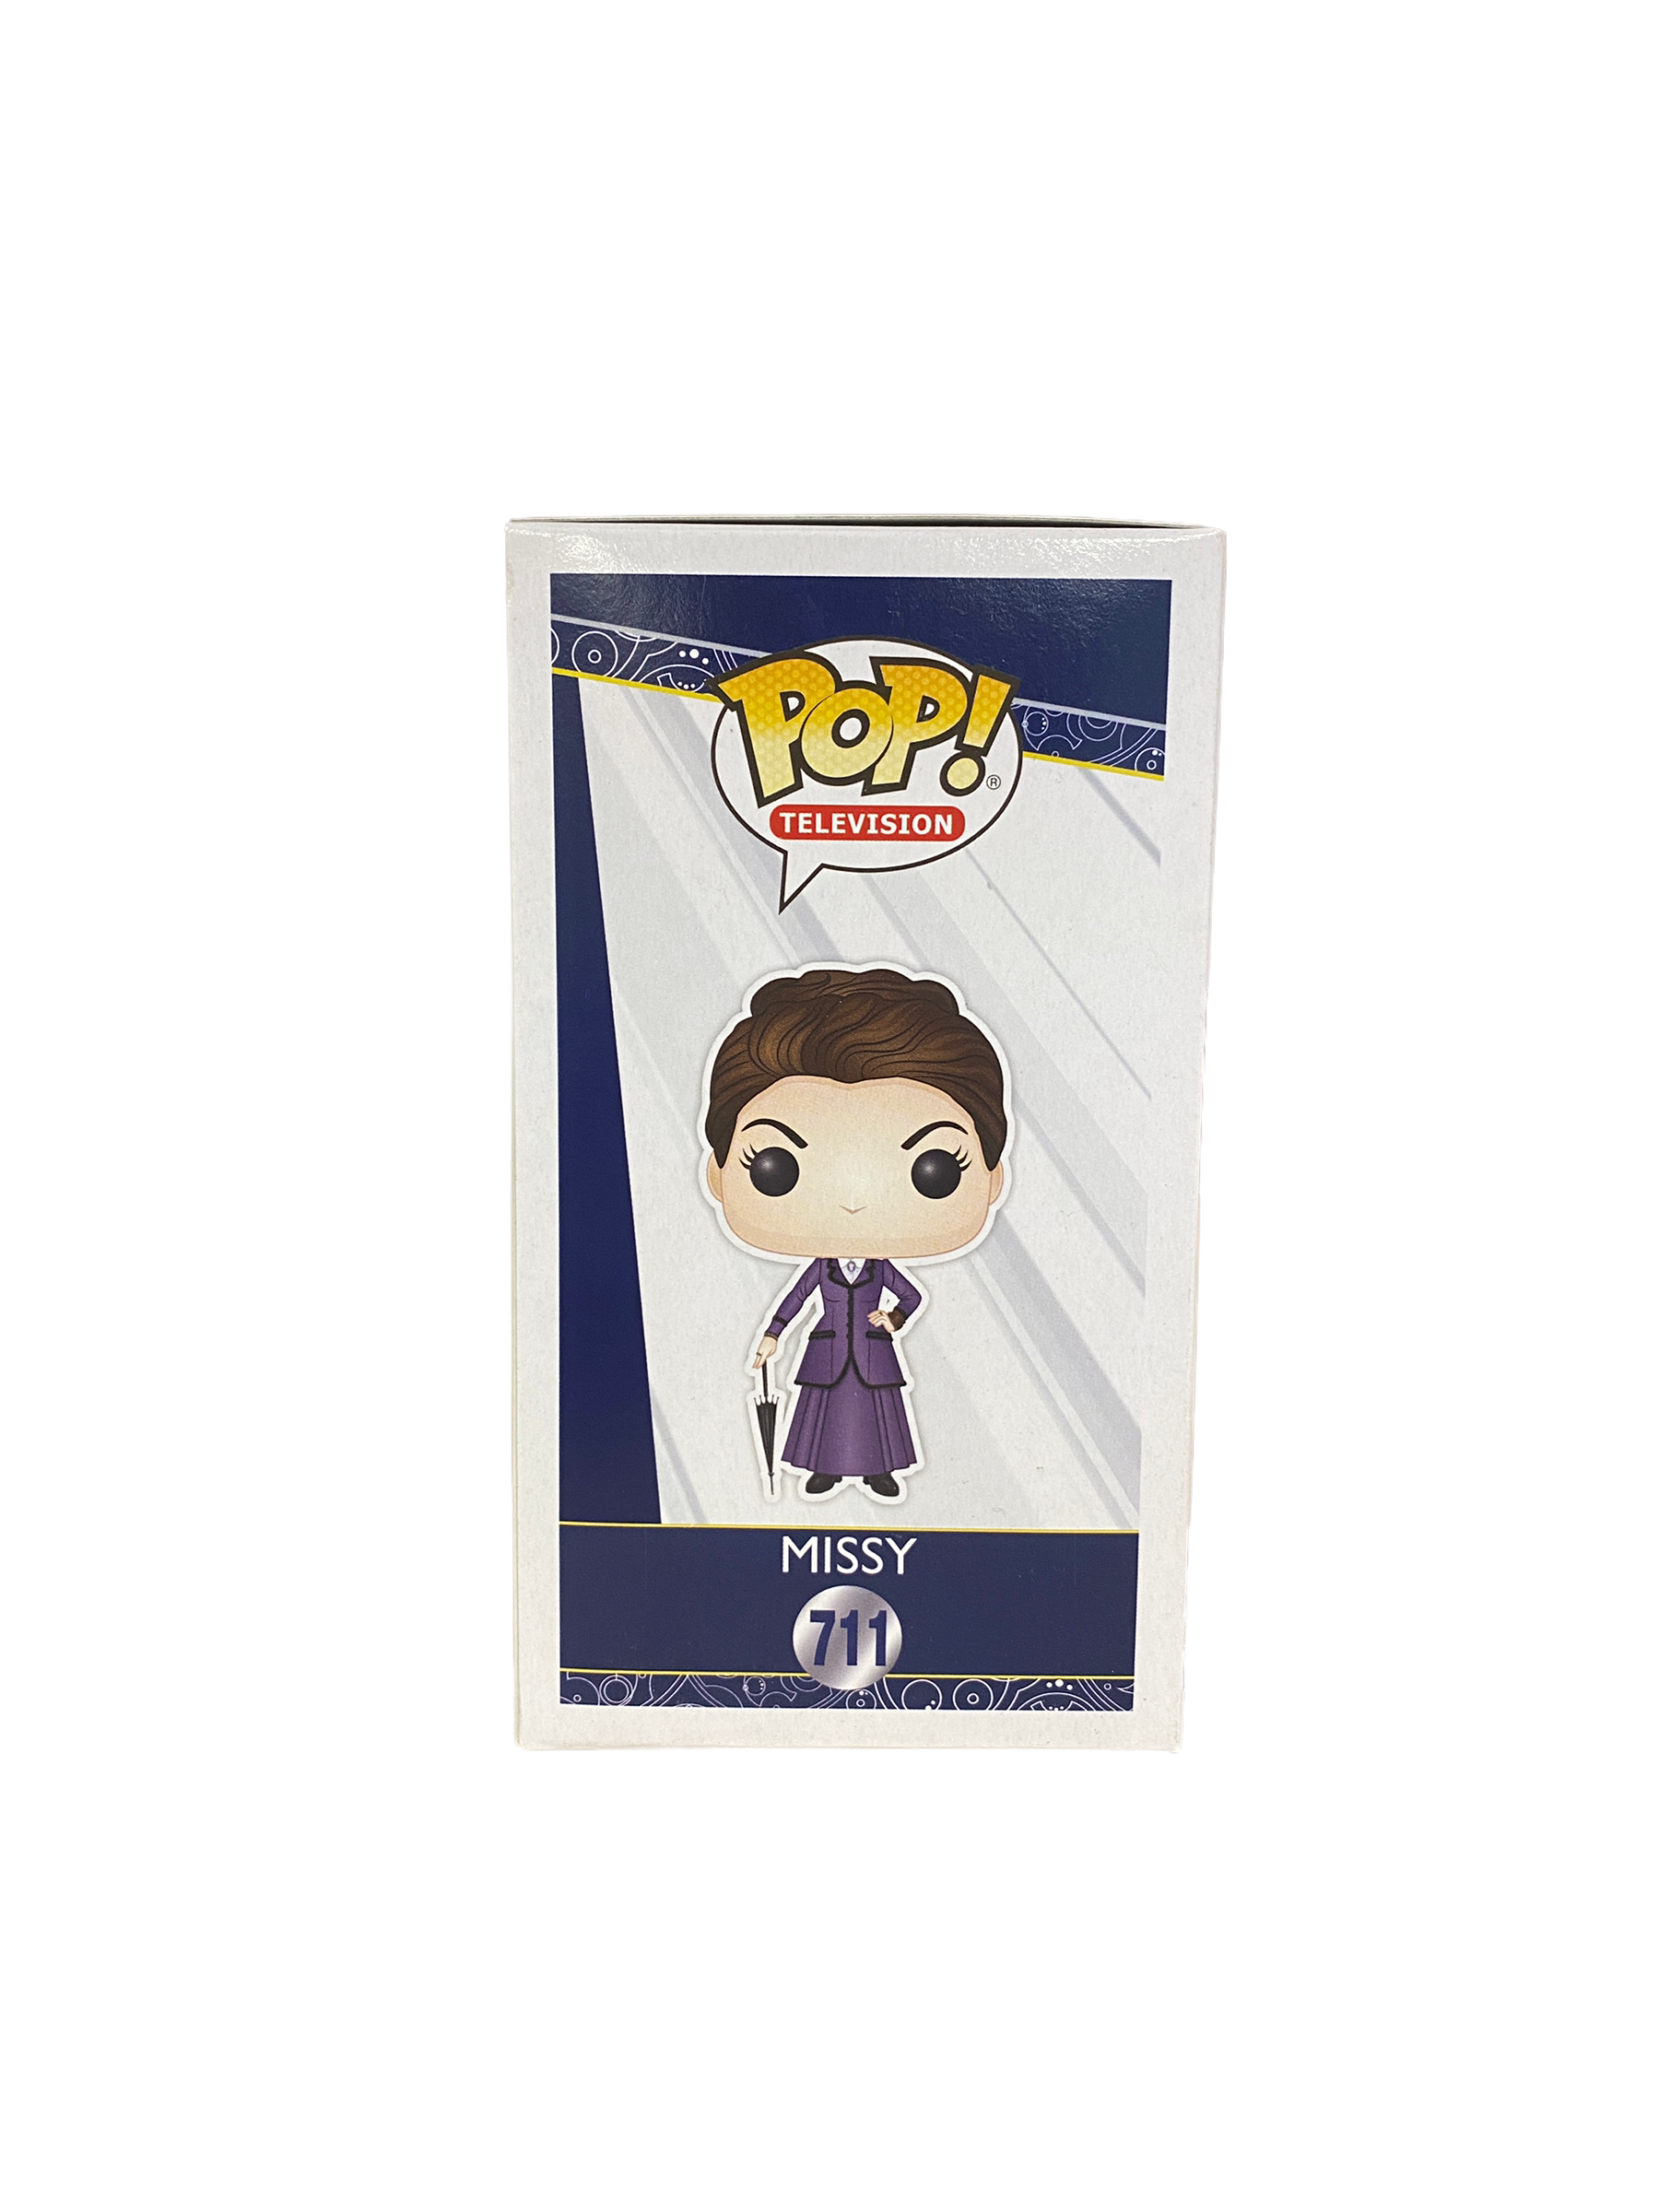 Missy #711 Funko Pop! - Doctor Who - 2018 Pop! - Condition 9/10